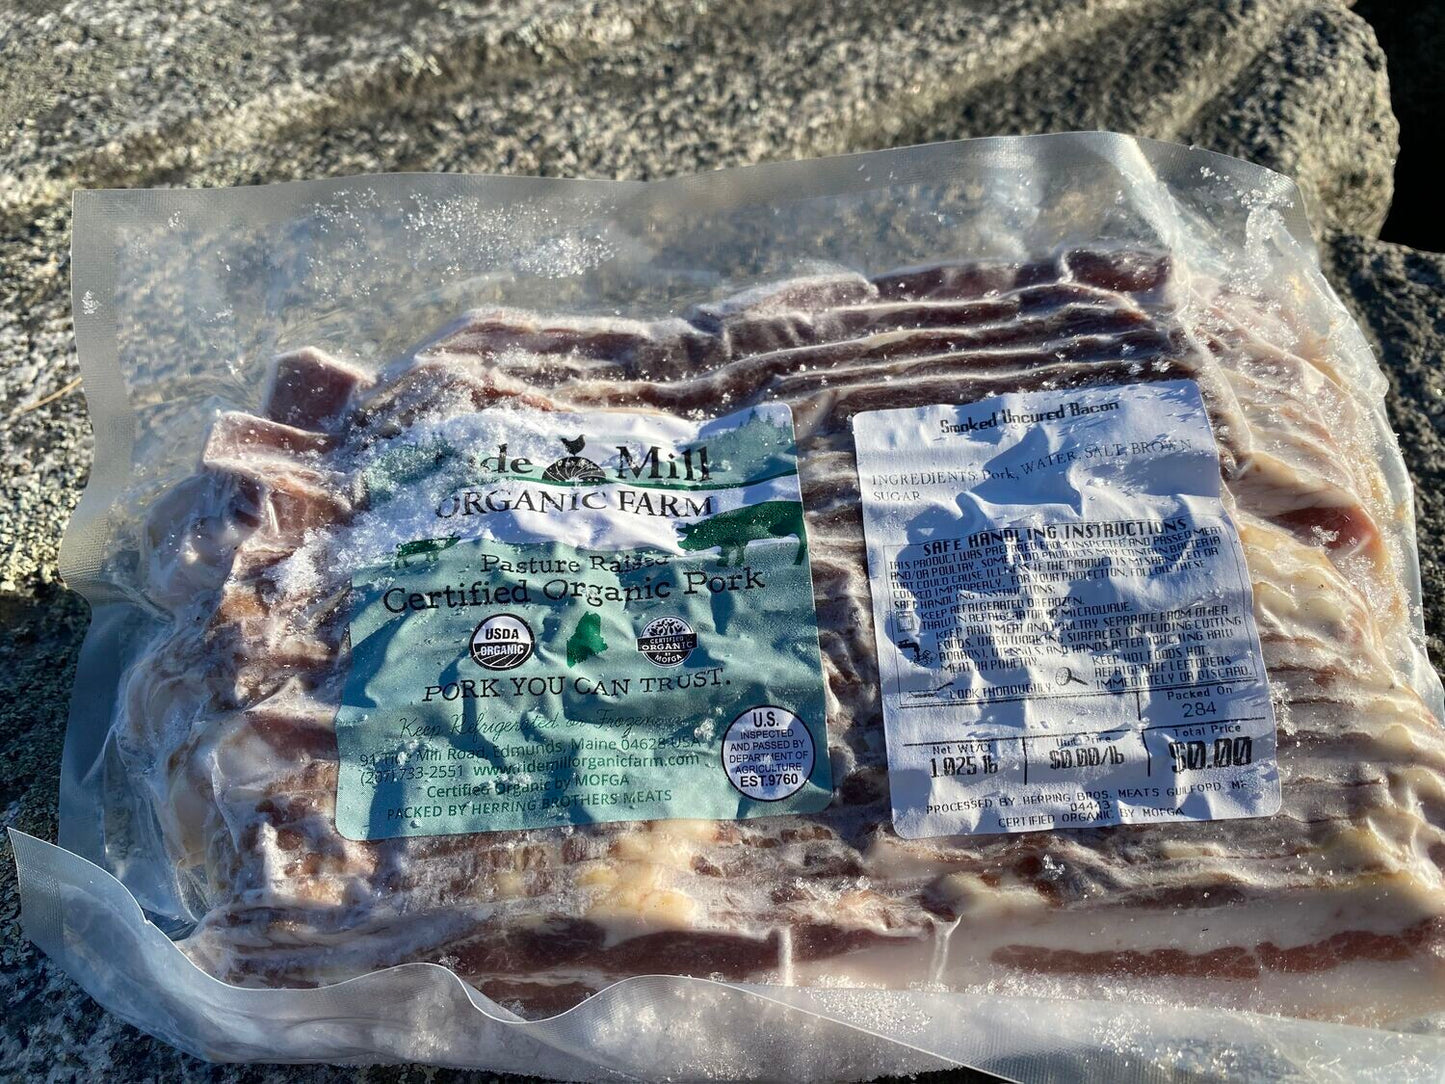 A package of certified organic bacon